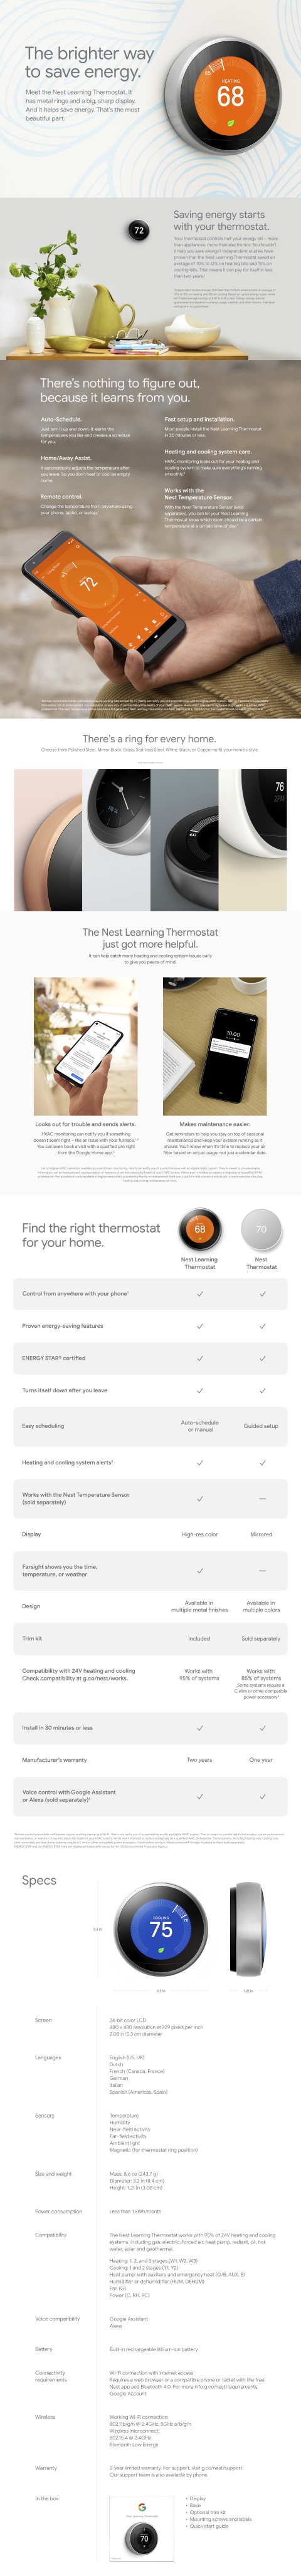 Google Nest Learning Smart Thermostat with WiFi Compatibility (3rd  Generation) - Stainless Steel in the Smart Thermostats department at